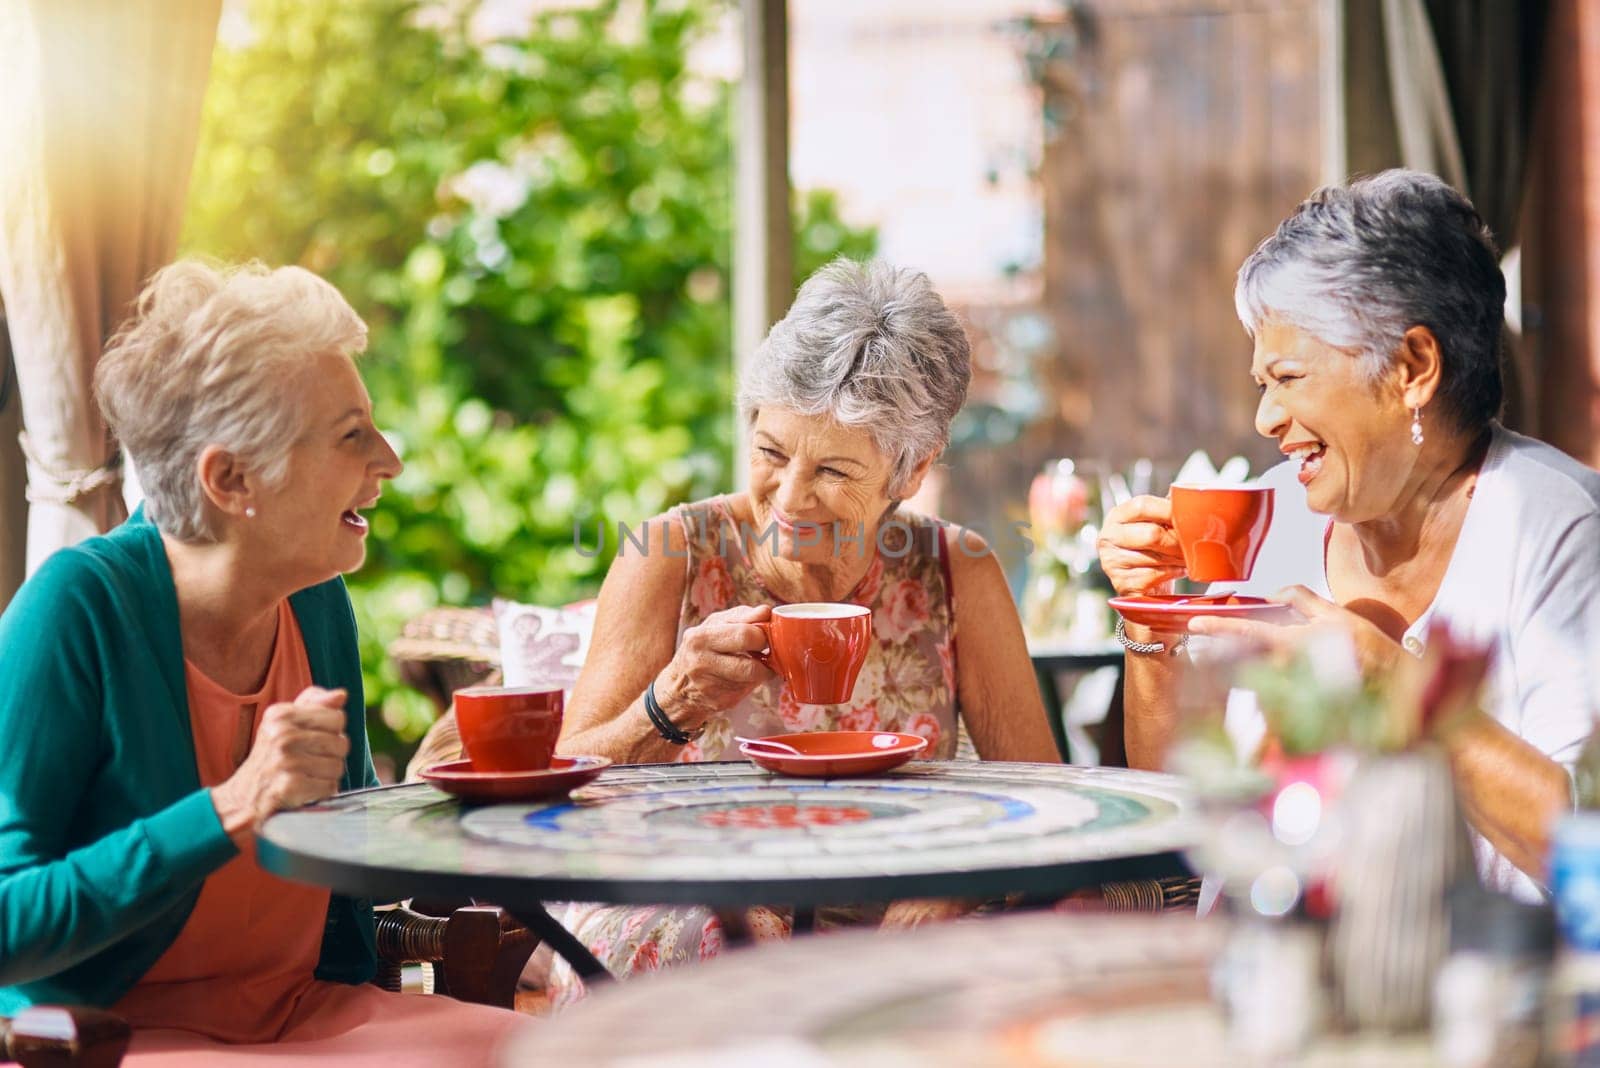 Coffee shop, funny and senior women talking, laughing and having friends reunion, retirement chat or social group. Restaurant, tea and elderly people in happy conversation for pension or cafe cafe.